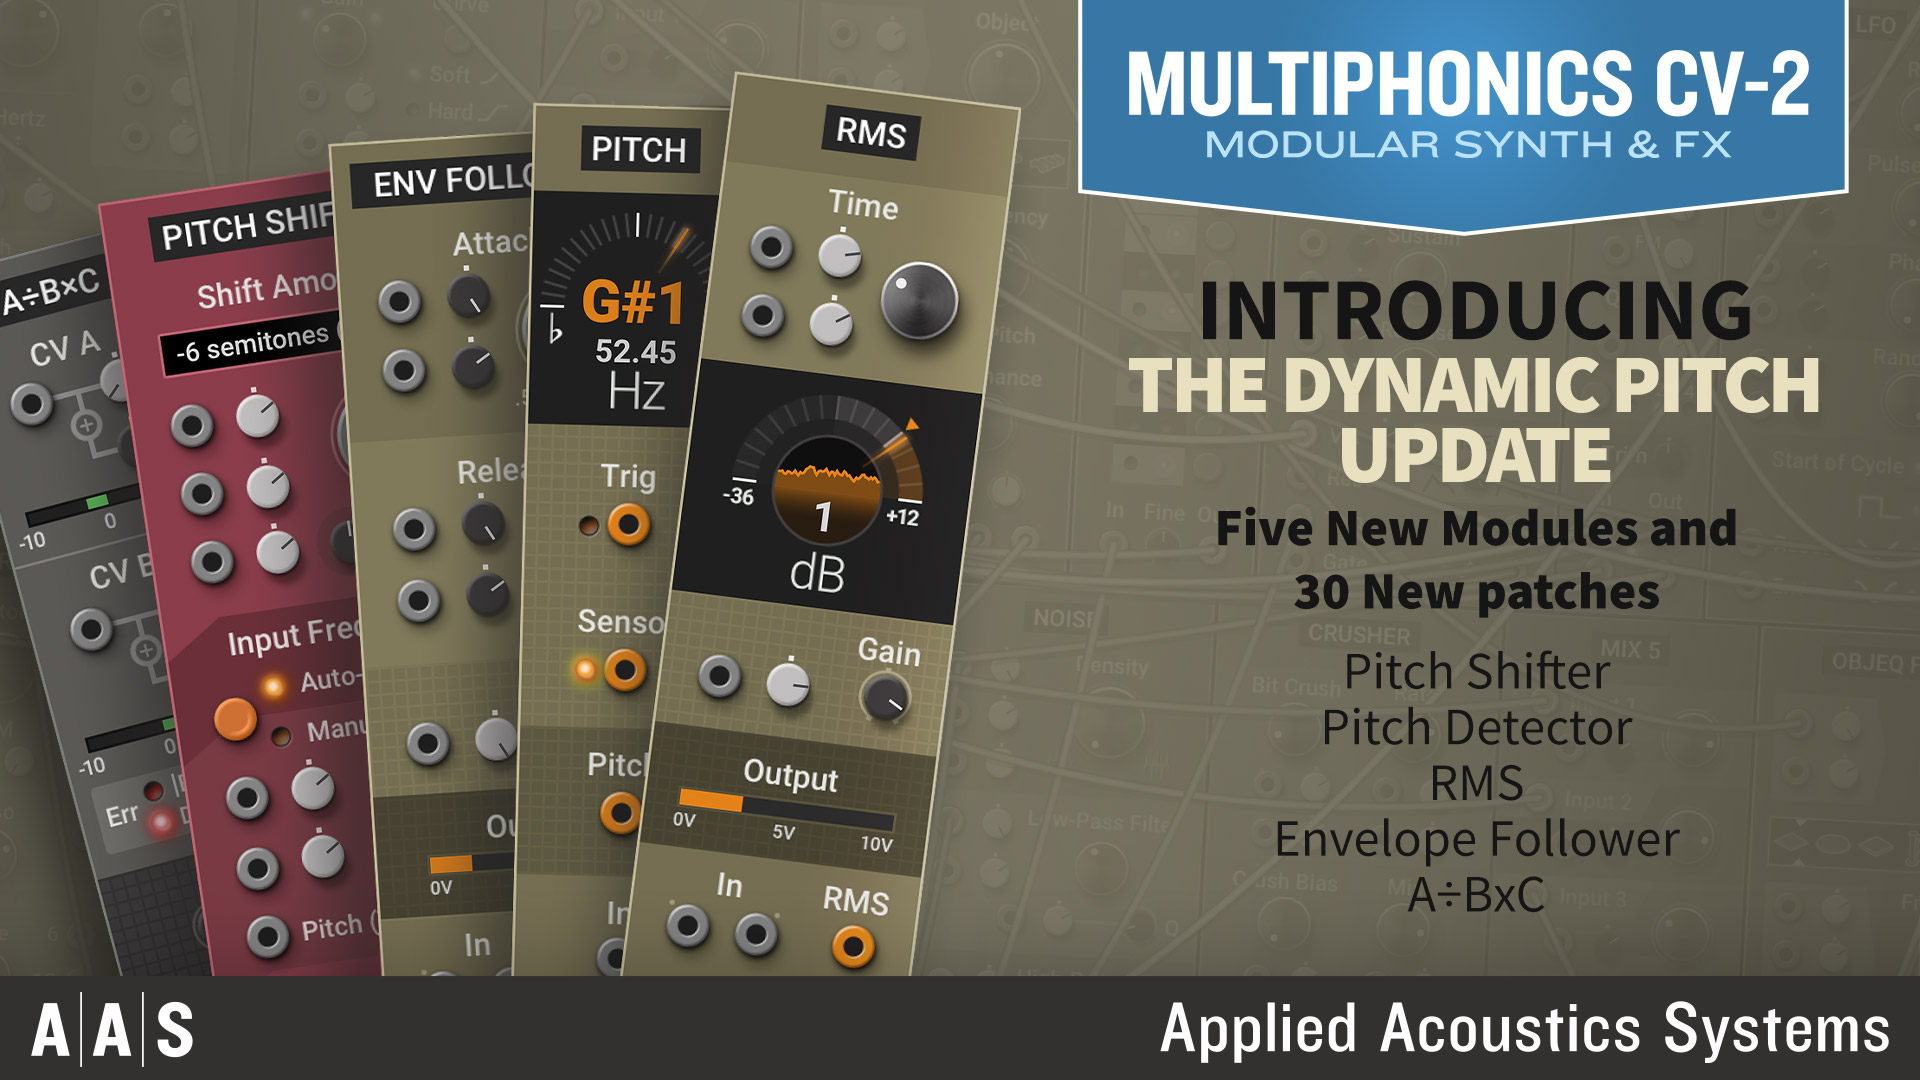 AAS updates Multiphonics CV-2 Modular Synthesizer to v2.2 - 5 new modules, 30 new patches